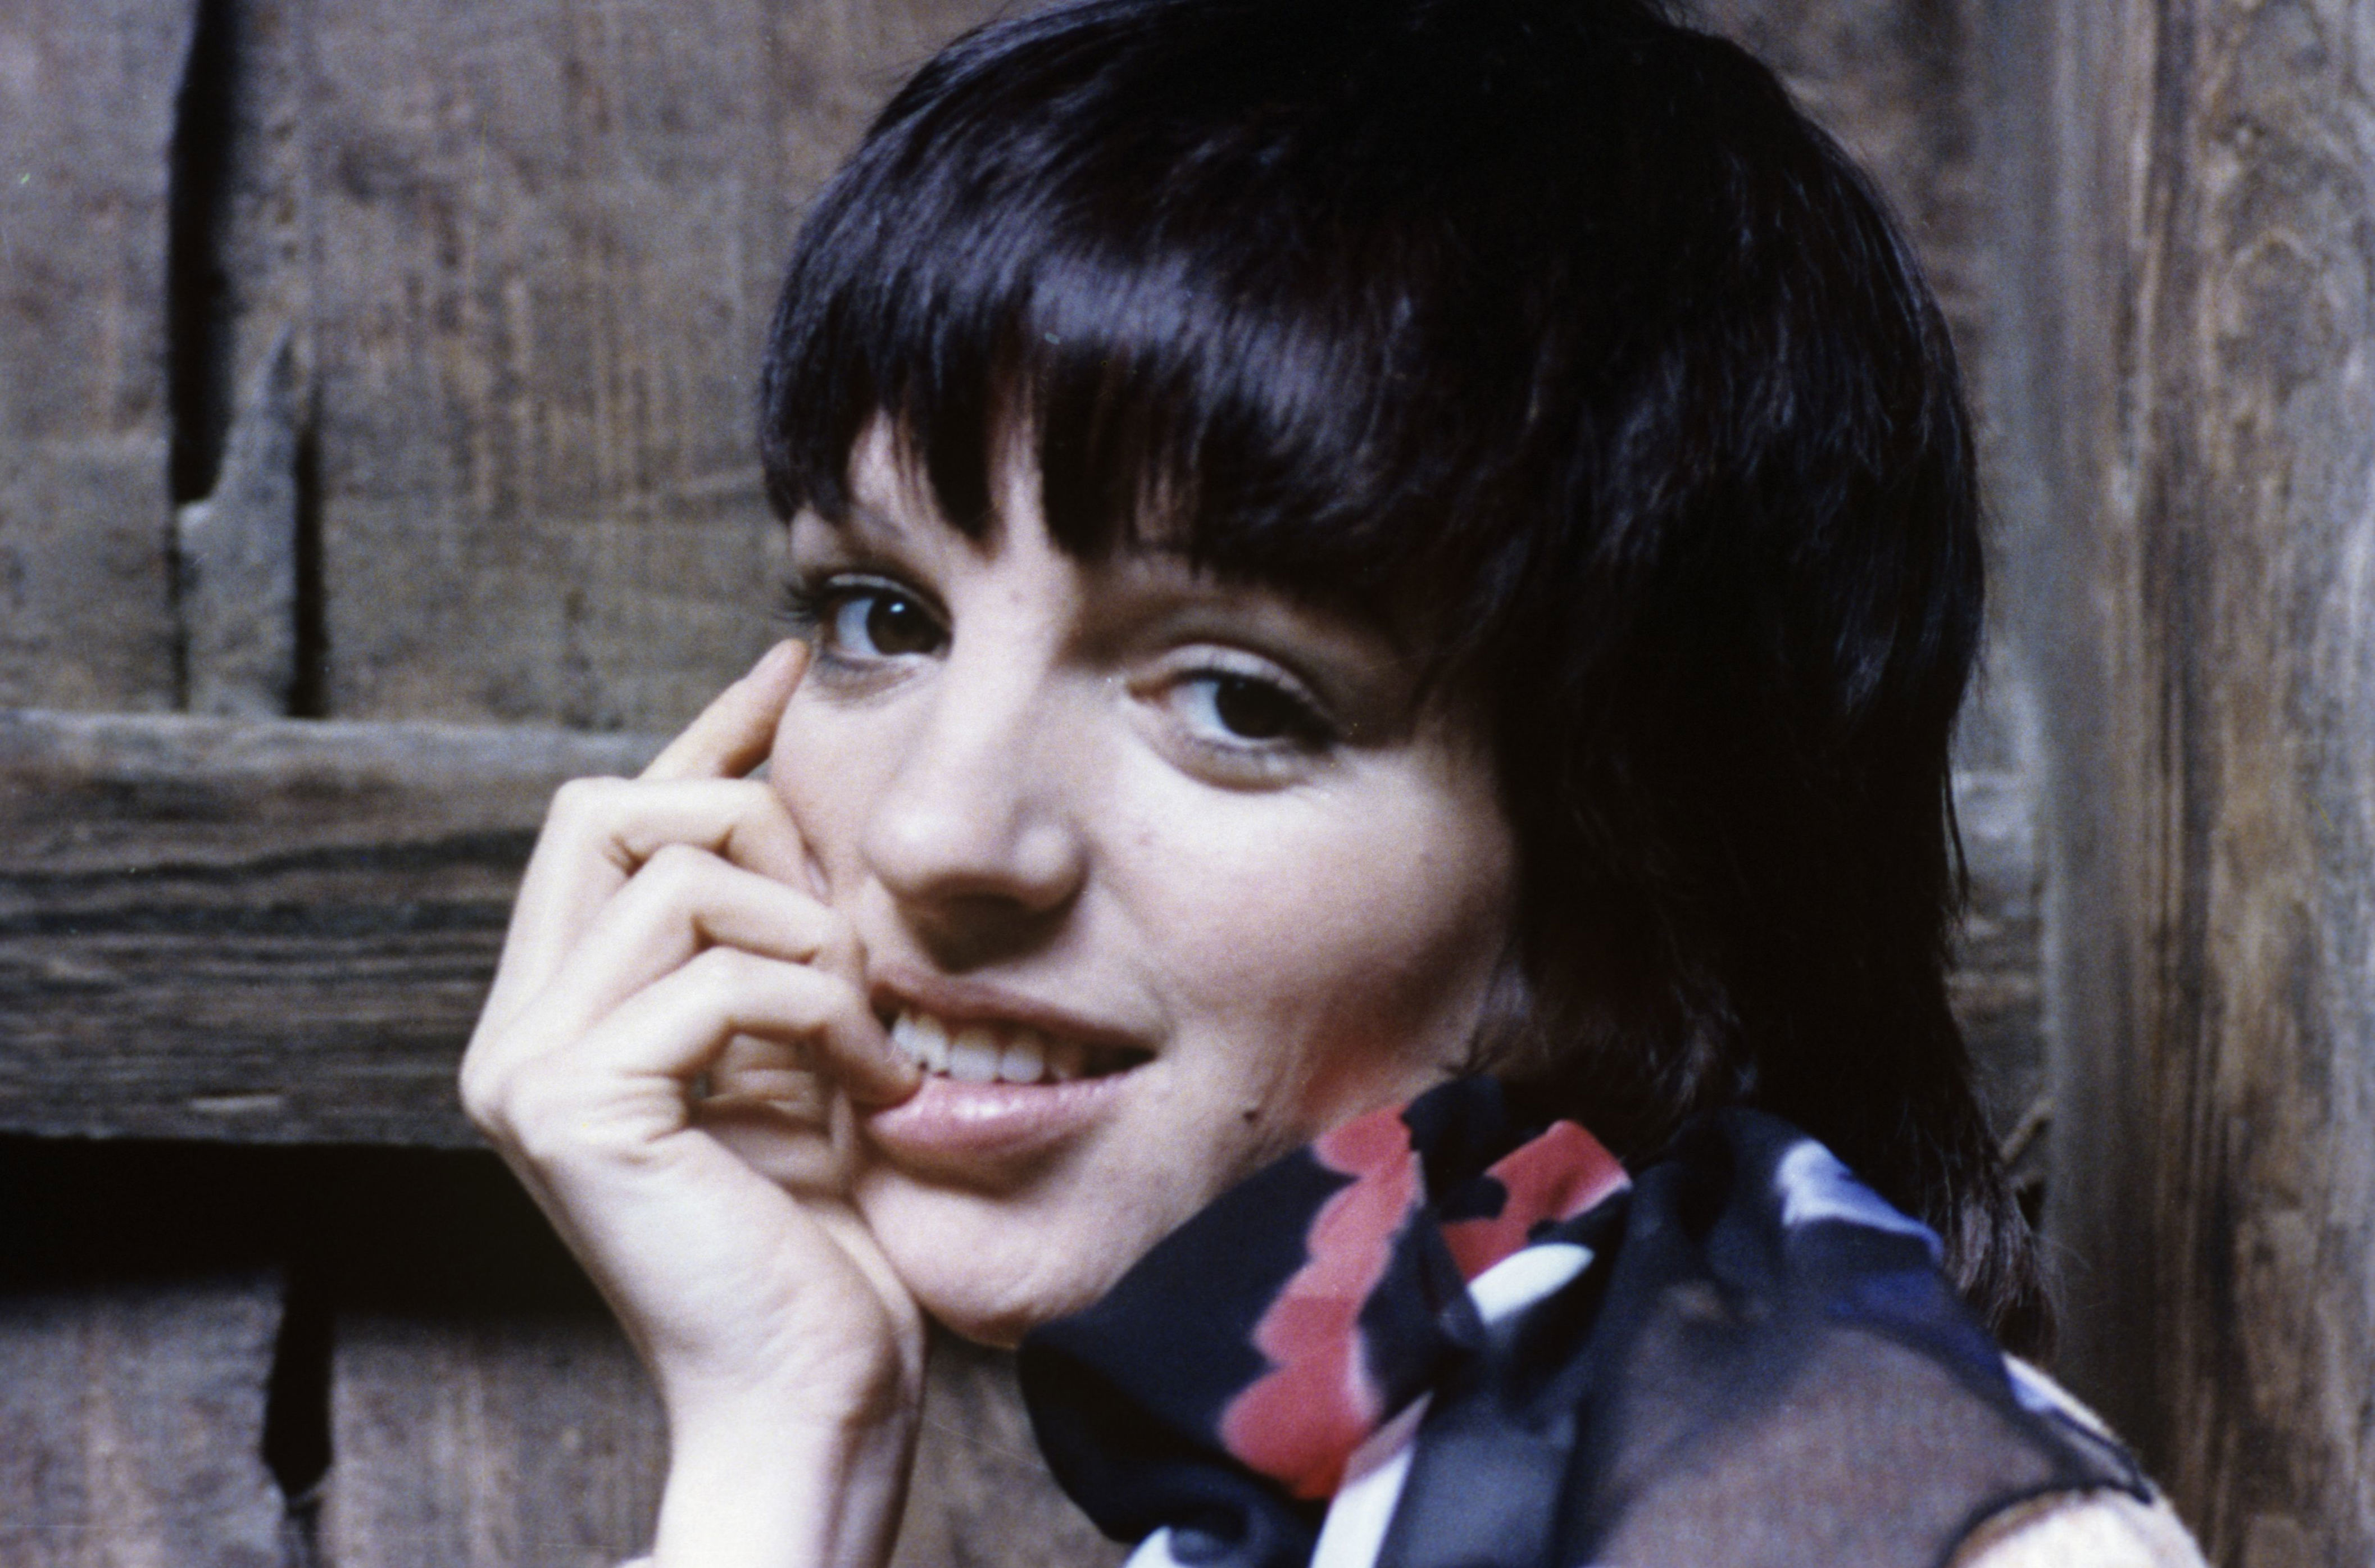 <p>Liza Minnelli -- daughter of the late Judy Garland -- was destined to become a star. But part of what made Liza (with a Z!) such a legend in her own right (aside from her obvious talent) was her quirky beauty, which was evident in this circa 1970 portrait.</p>